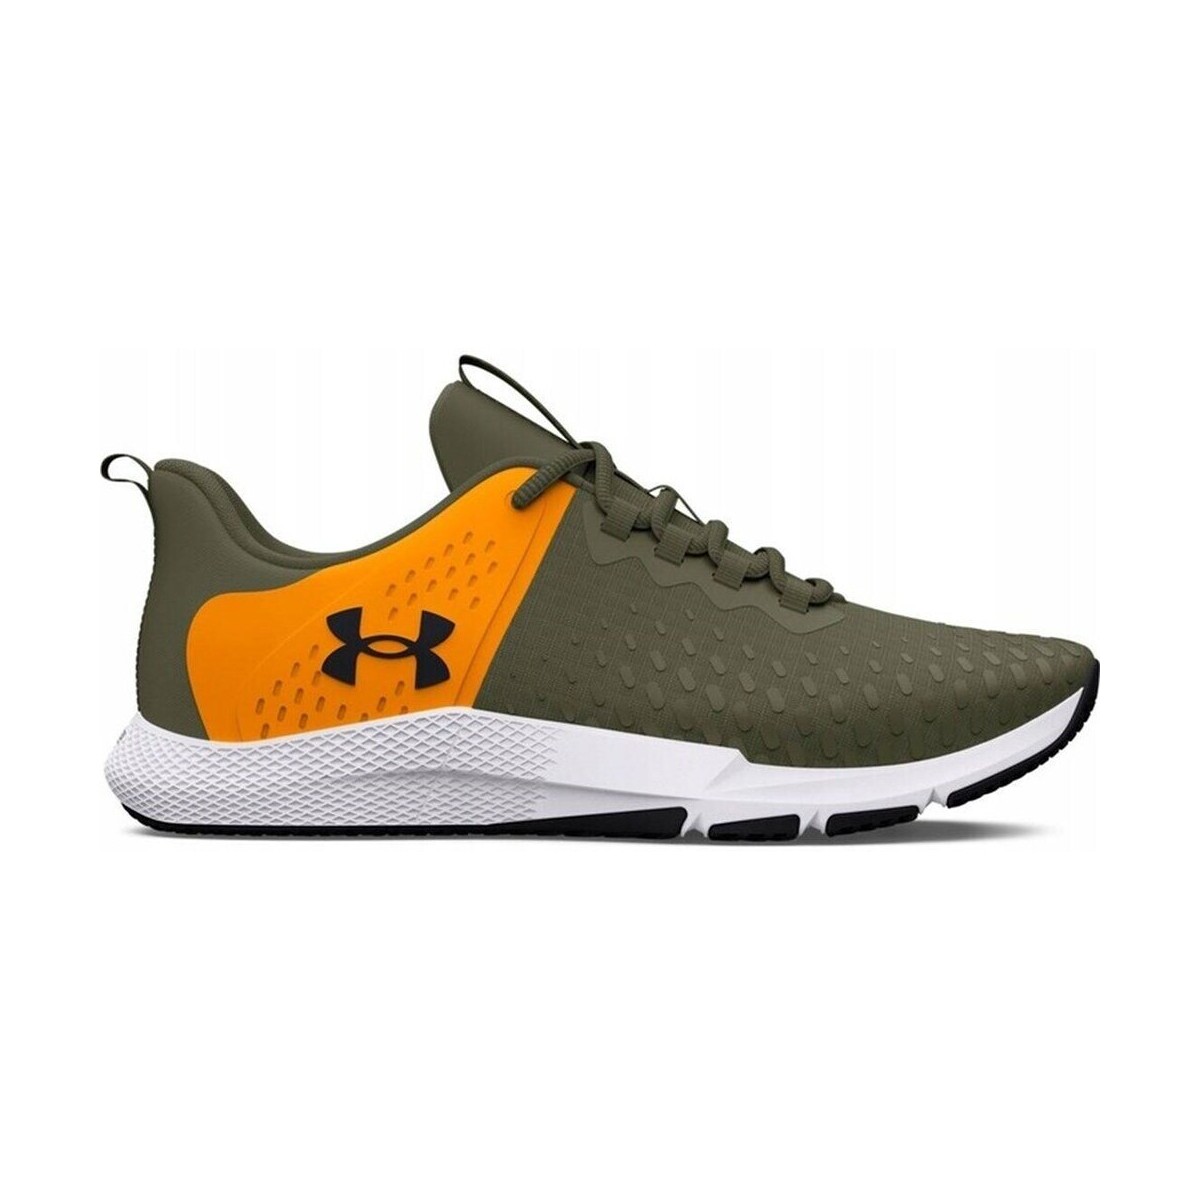 Under Armour Charged Engage 2 multicolour